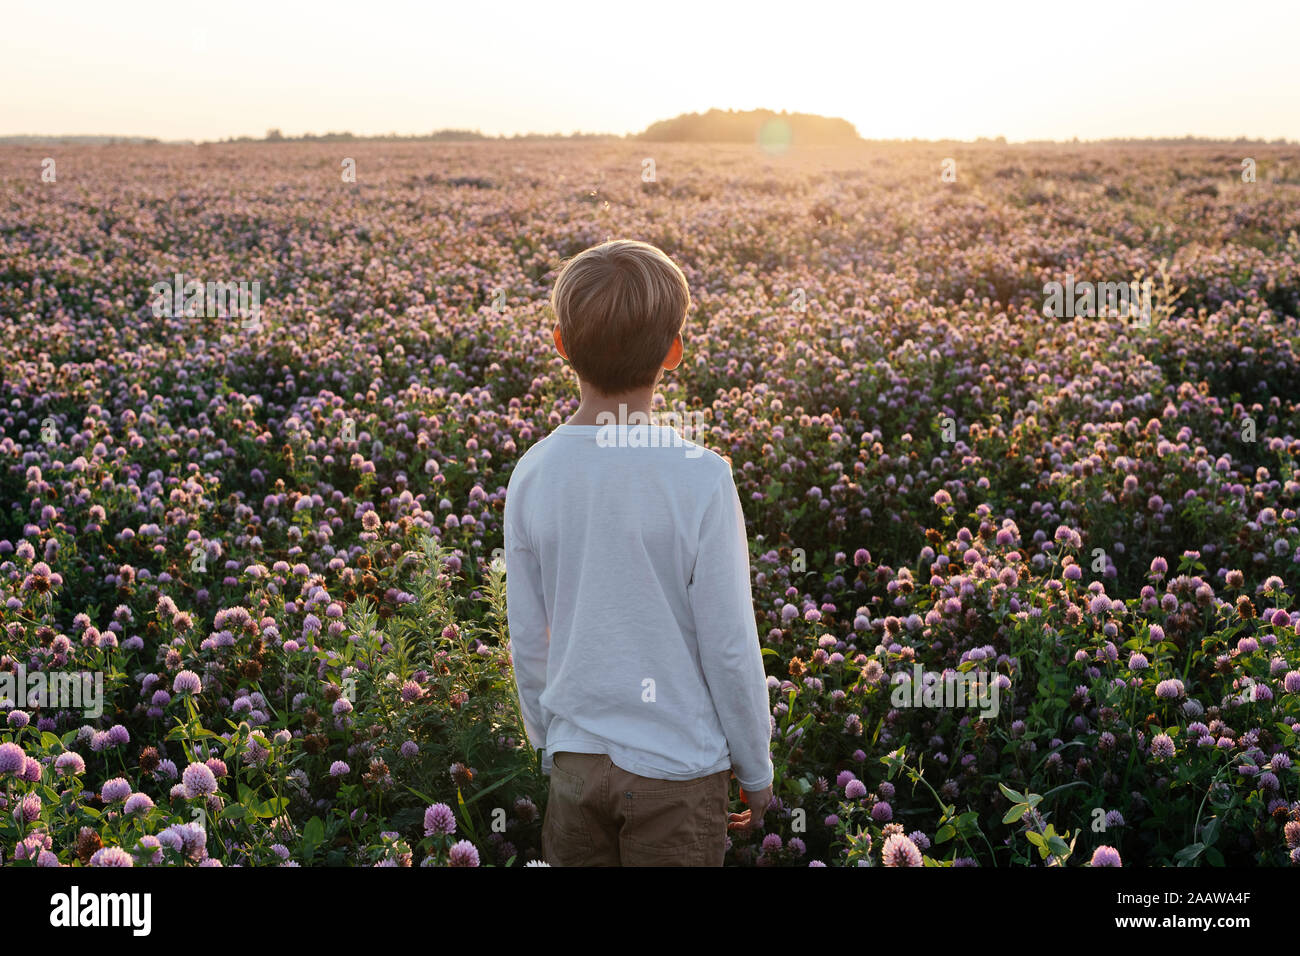 Boy standing on a clover field Stock Photo